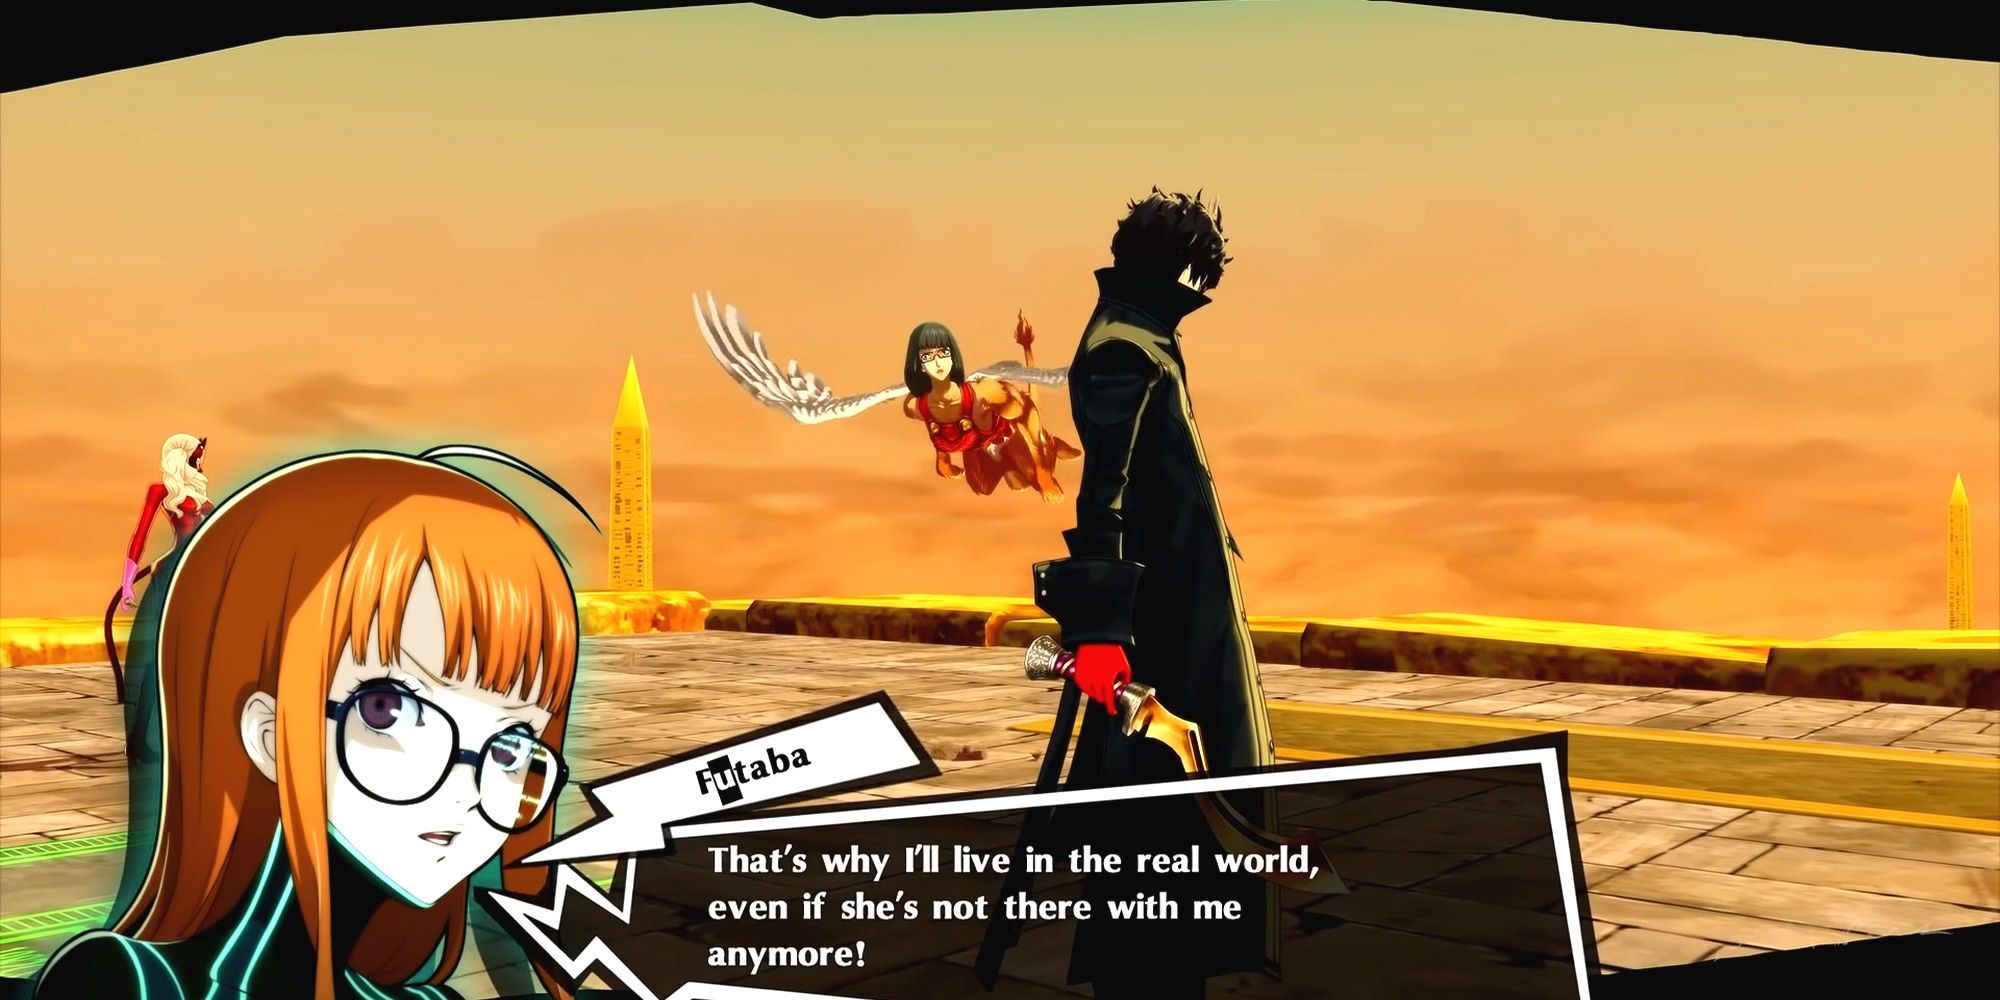 futaba confronting the loss of her mother during the shadow wakaba fight